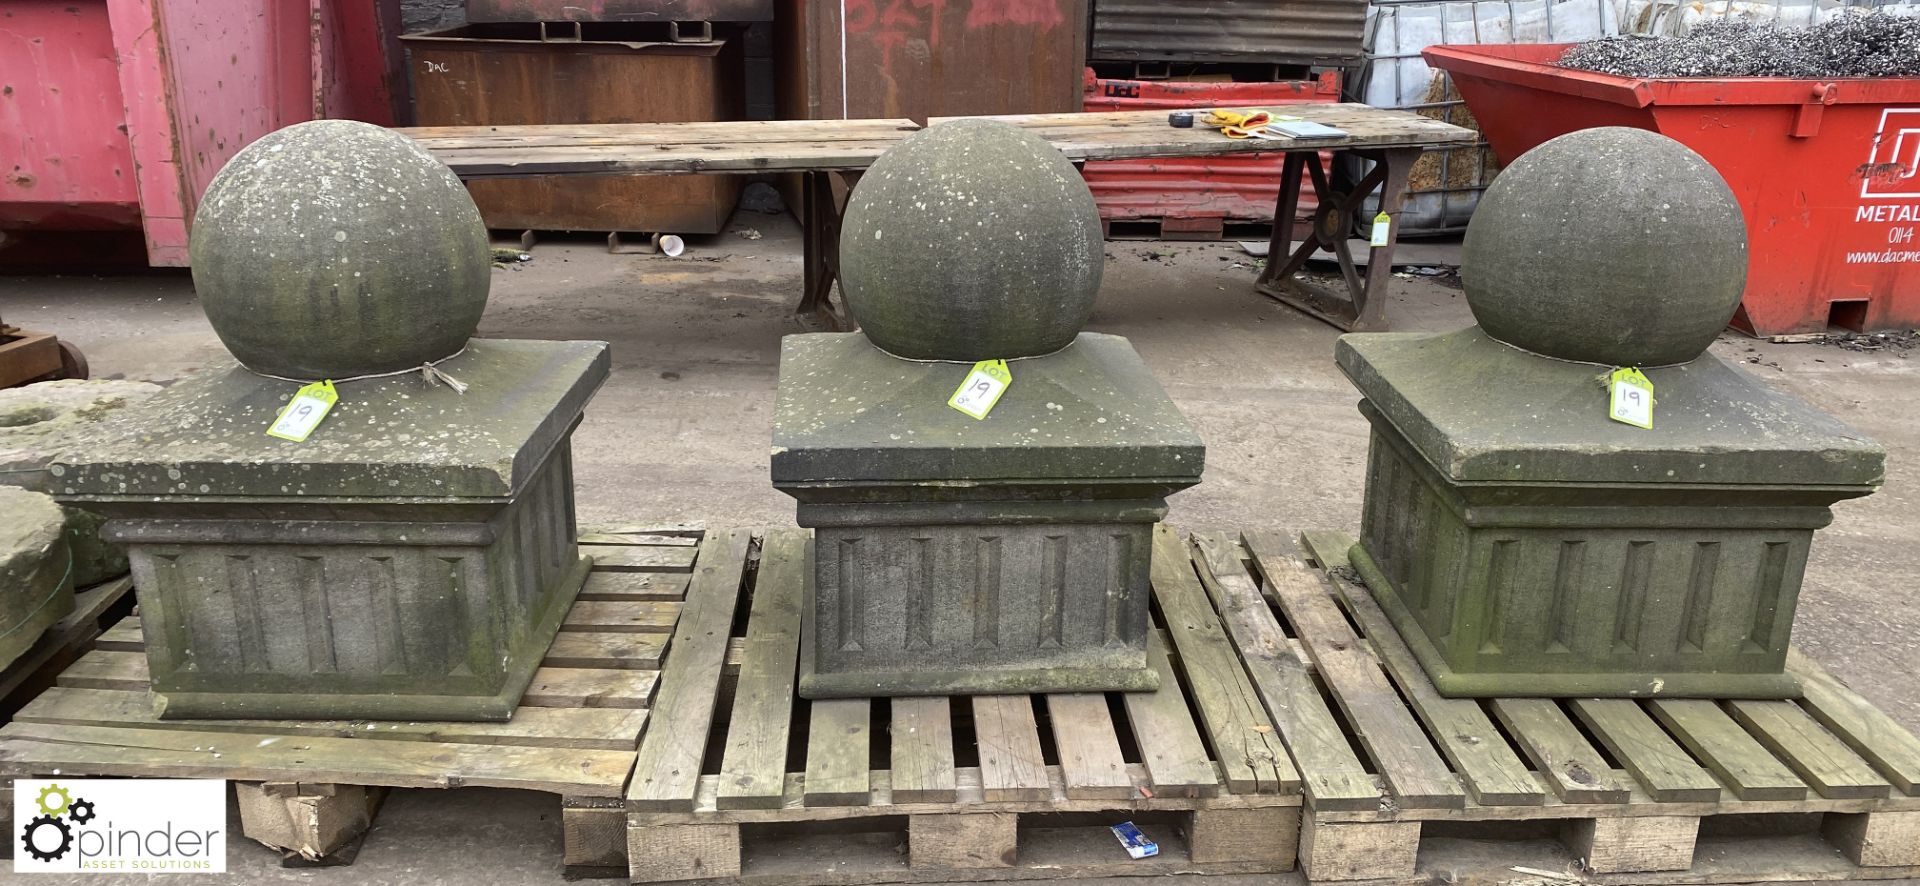 Set 3 Yorkshire stone Gate Post Pier Caps, with ball top, base 600mm x 600mm, 900mm tall - Image 2 of 11